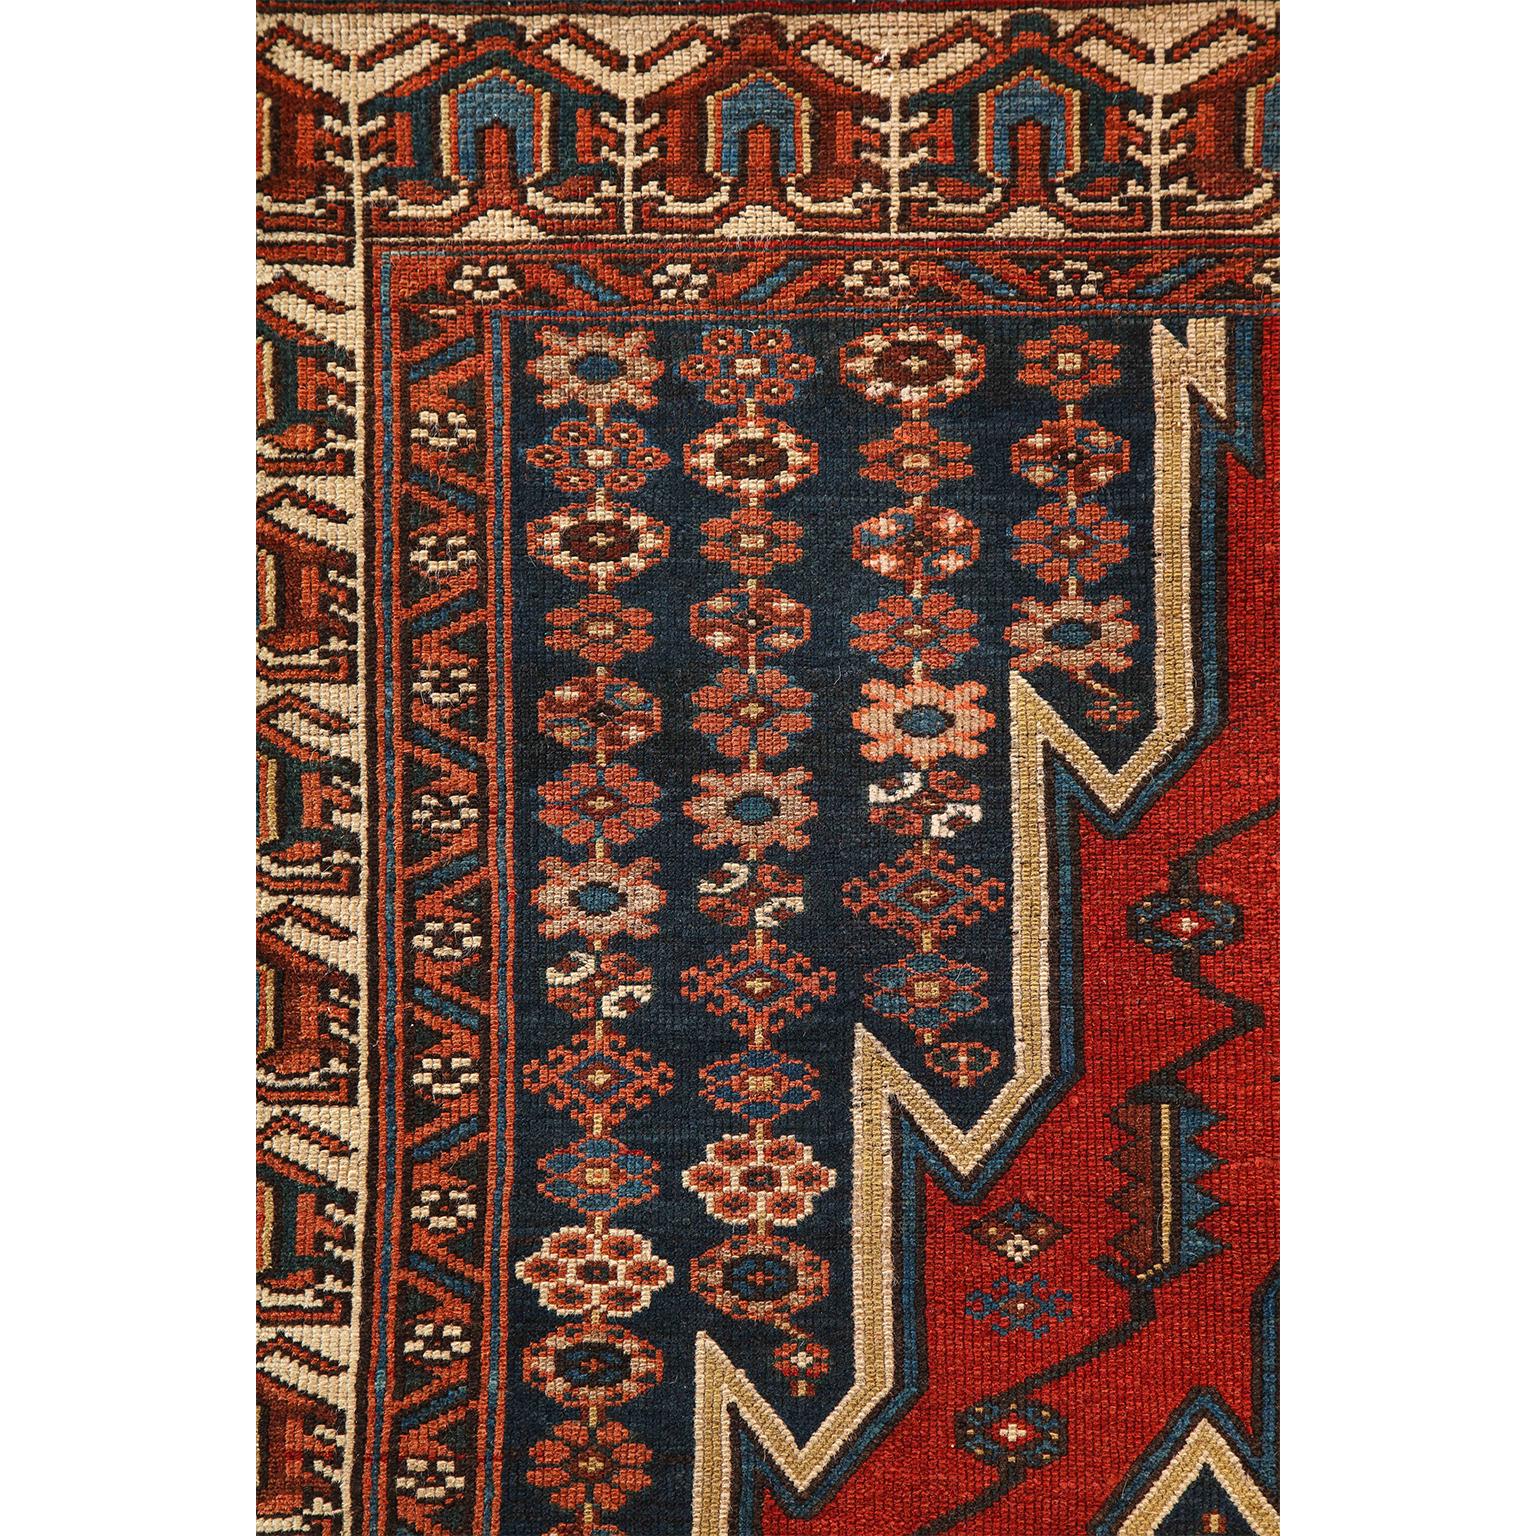 Antique 1920s Wool Persian Mazlaghan Rug, 4' x 6' In Good Condition For Sale In New York, NY